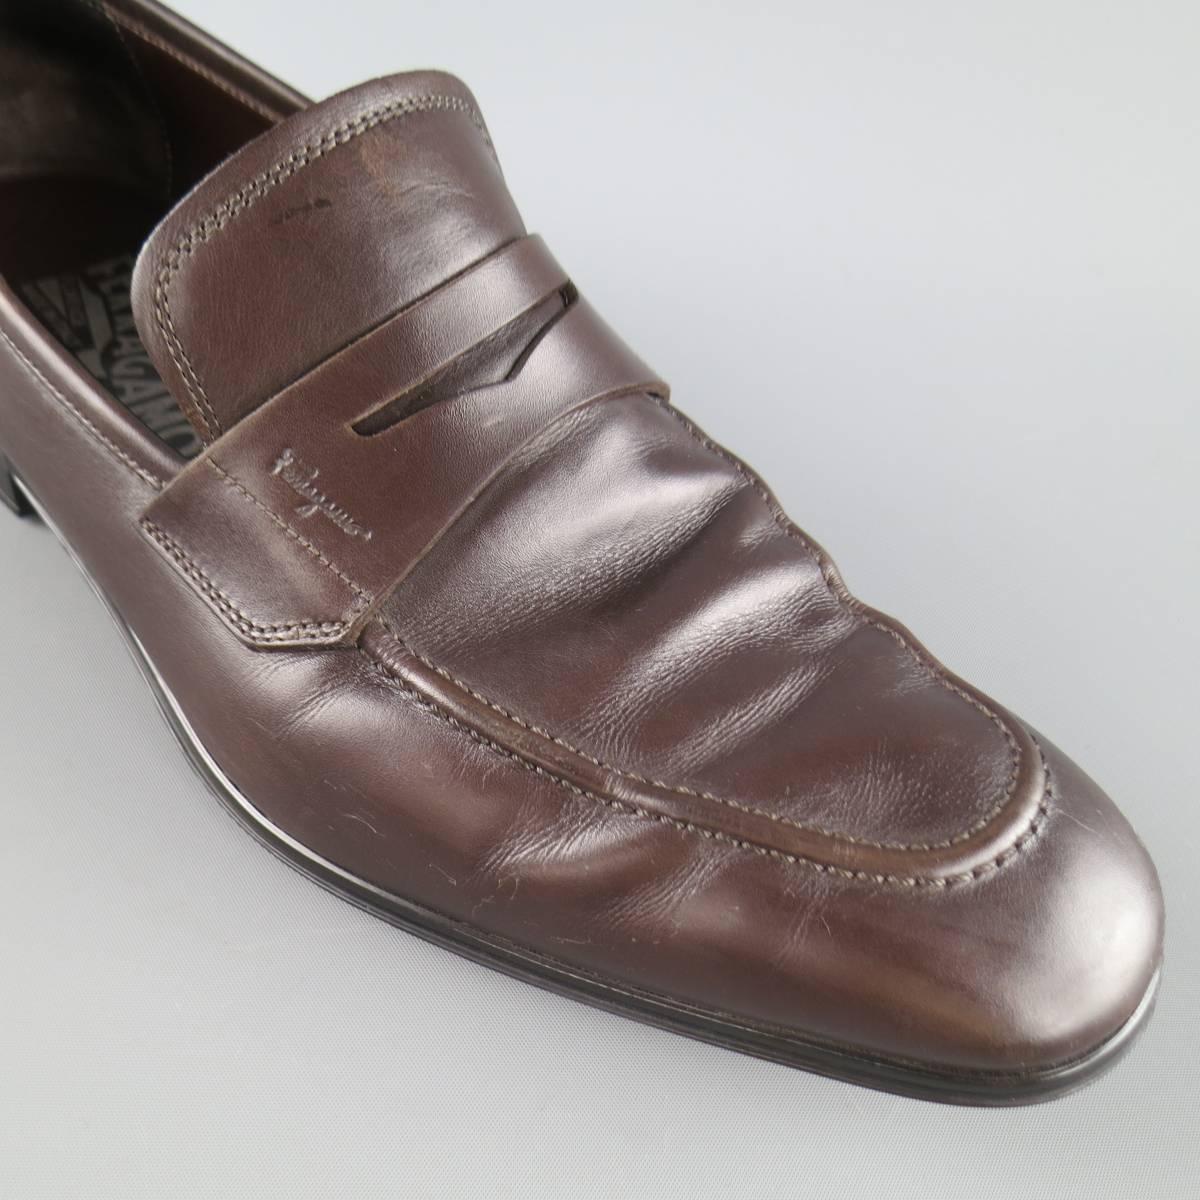 SALVATORE FERRAGAMO classic penny loafers come in a rich chocolate brown leather and feature an apron toe and cutout strap. Wear on toe. With box. Made in Italy.
 
Good Pre-Owned Condition.
Marked: 7.5 E
 
Outsole: 11.5 x 3.75 in.


Web ID: 82945 